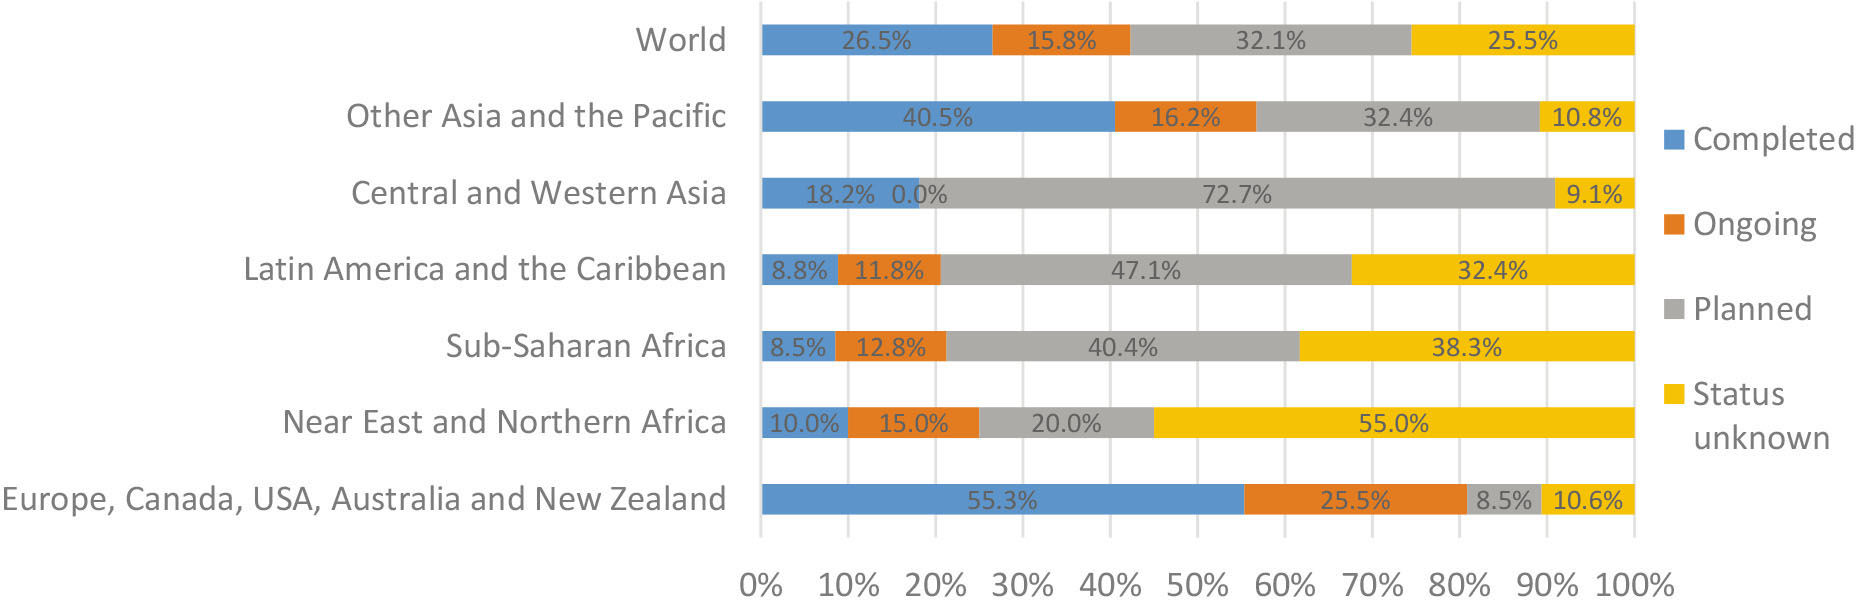 Percentage of countries according to their implementation status of the World Census of Agriculture 2020 Round (i.e. Agricultural Censuses conducted between 2016 and 2025), per implementation status and region (Source: FAO, Internal WCA monitoring, 7 January 2022).